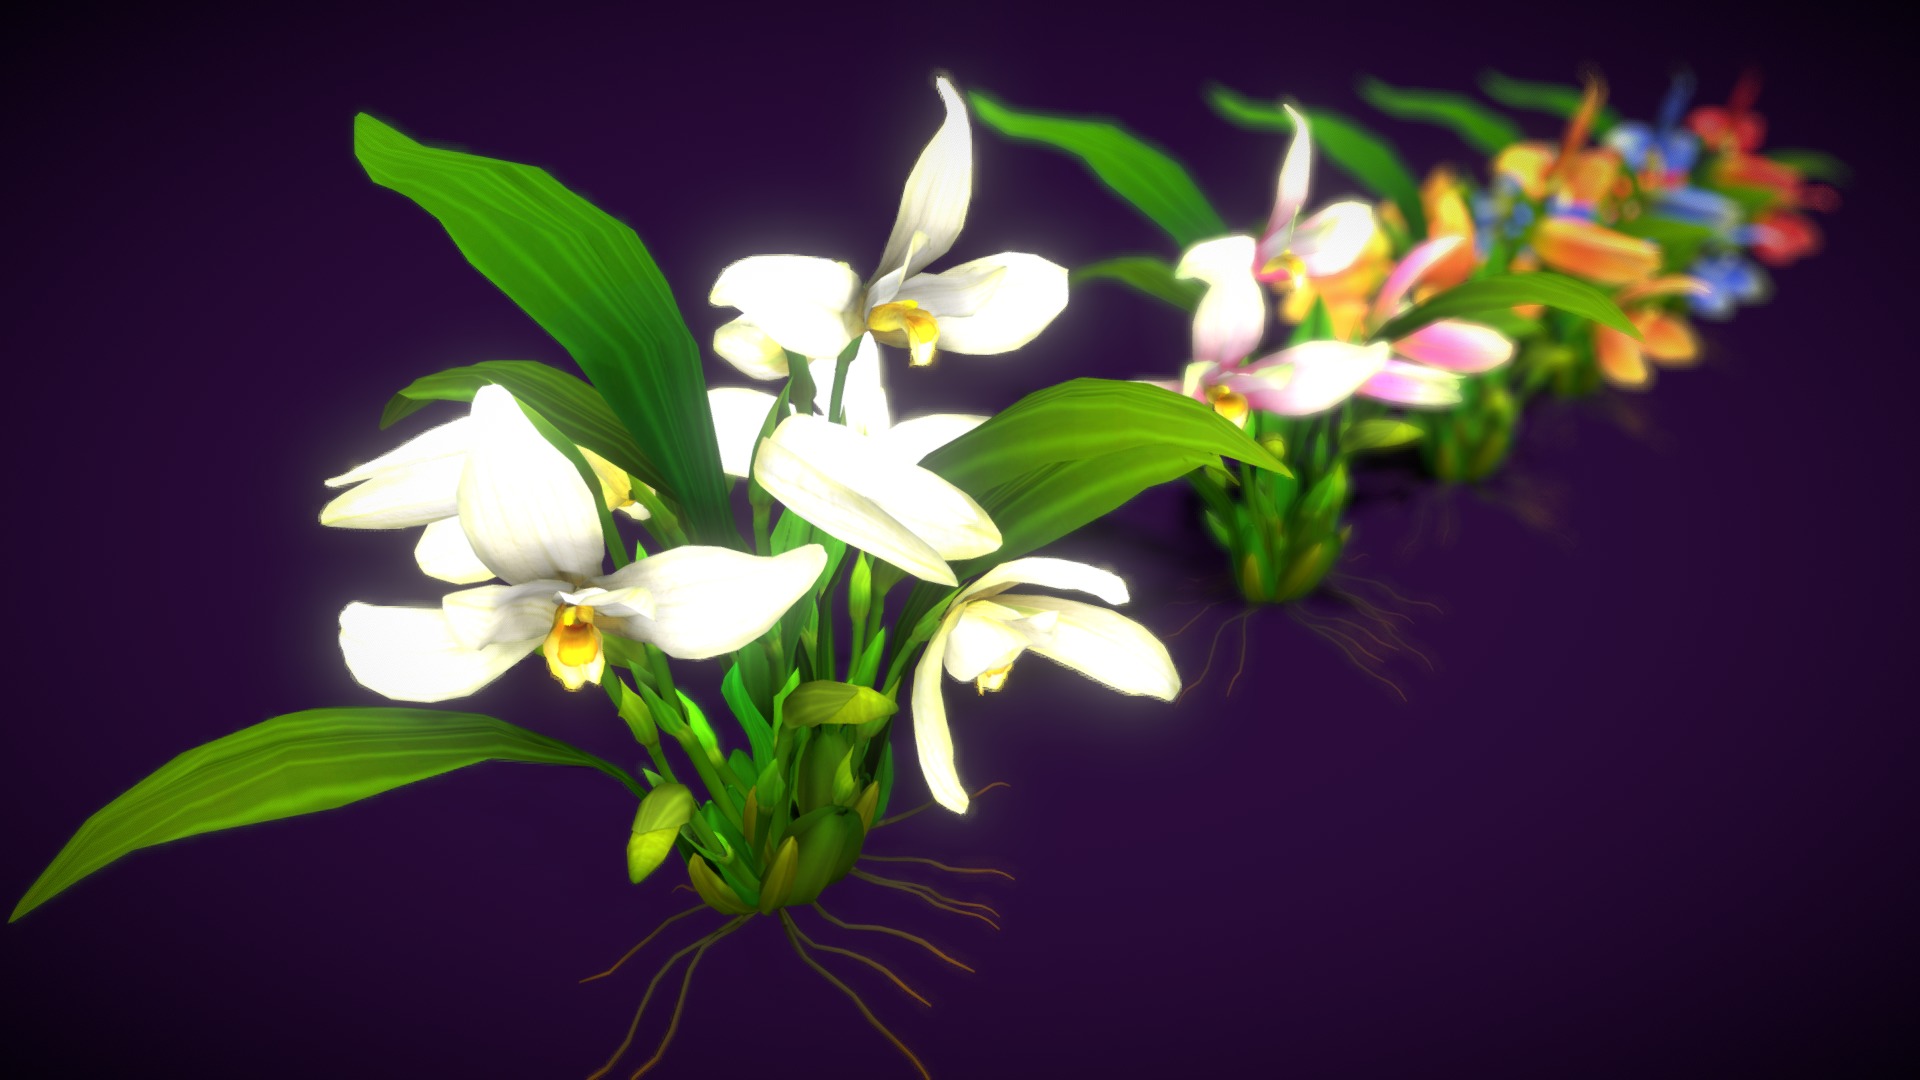 3D model Flower Guatemala Lan Lycaste - This is a 3D model of the Flower Guatemala Lan Lycaste. The 3D model is about a close-up of some flowers.